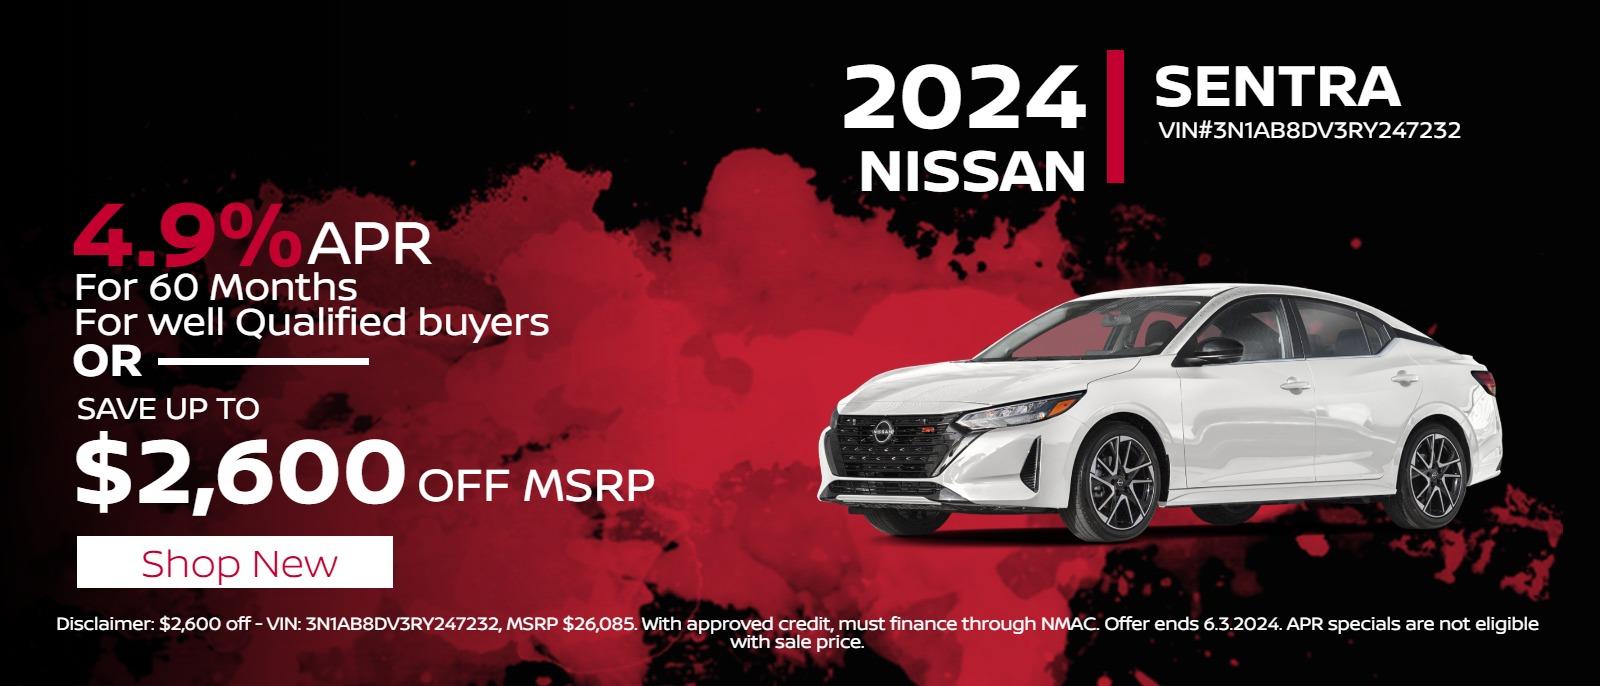 Sentra
2024 Nissan Sentra
Save up to
$2,600
Off MSRP

Or

4.9%
APR Financing
For 60mos.
For well Qualified buyers